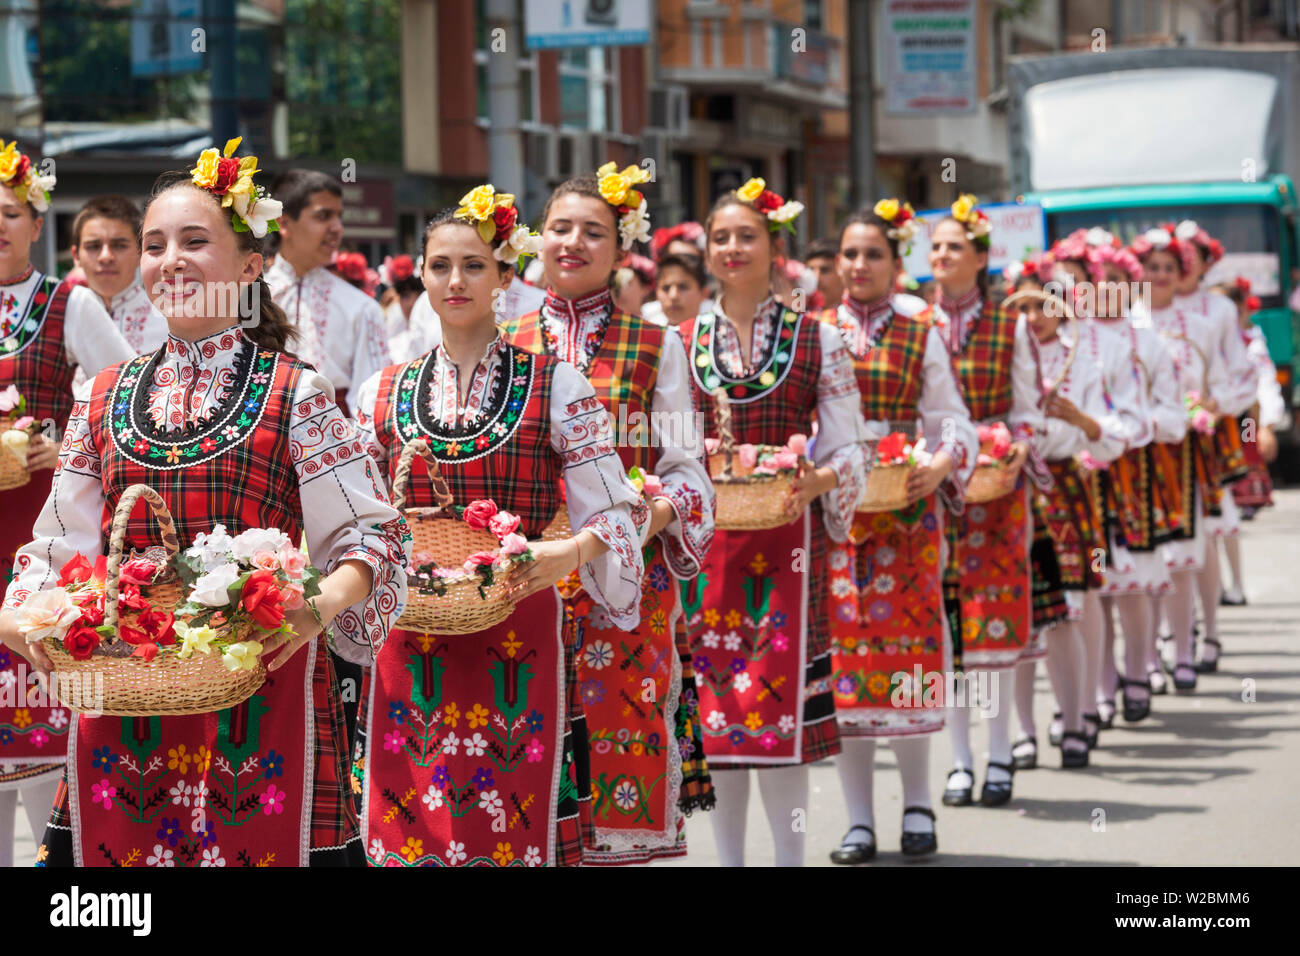 Bulgaria, Central Mountains, Kazanlak, Kazanlak Rose Festival, town produces 60% of the world's rose oil, Rose Parade, young women in traditional costumes, NR Stock Photo